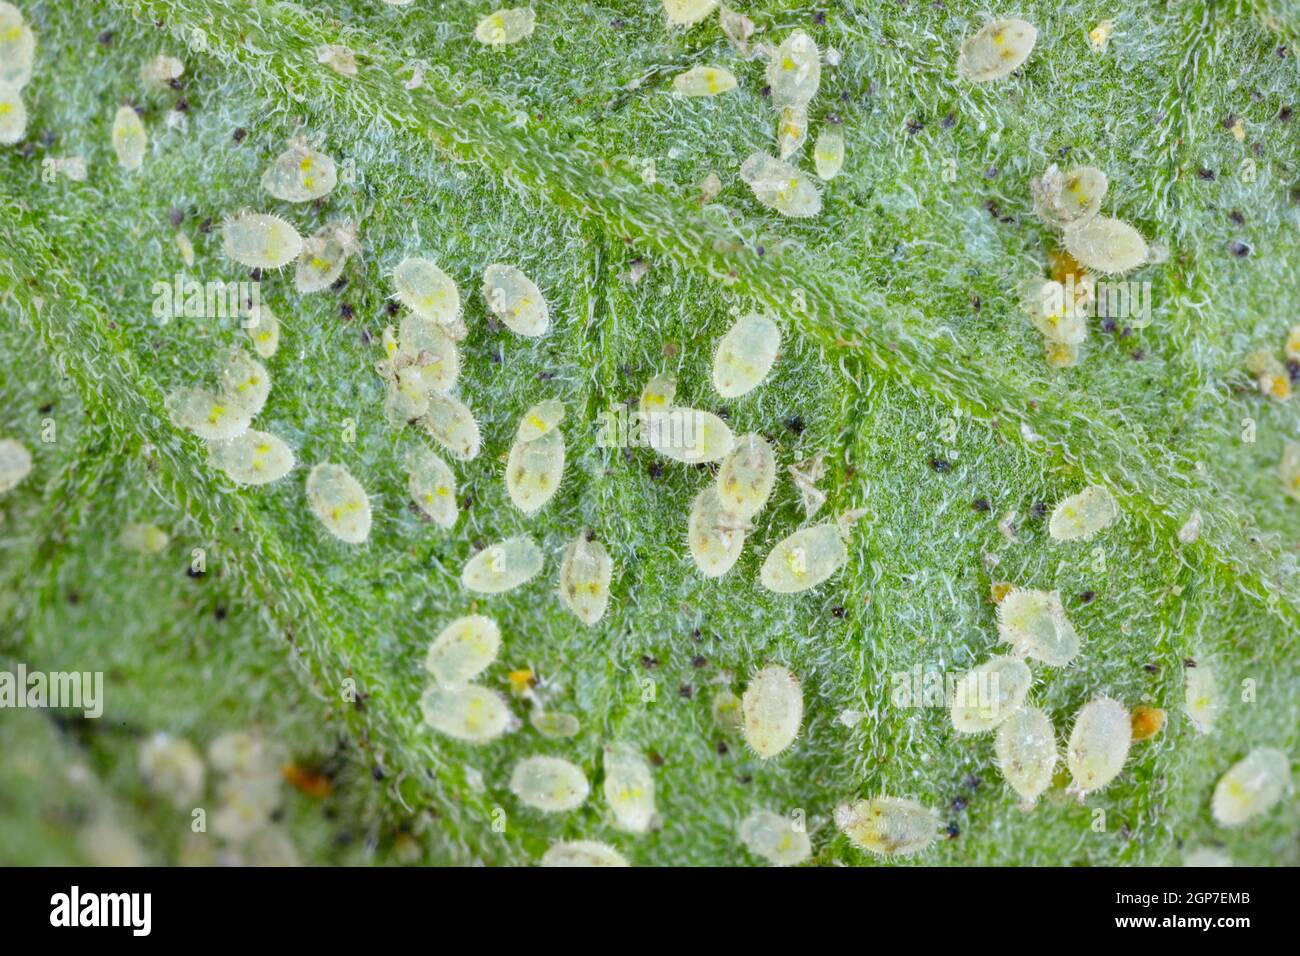 Larvae and pupae of Glasshouse whitefly (Trialeurodes vaporariorum) on the underside of tomato leaves. It is a currently important agricultural pest. Stock Photo